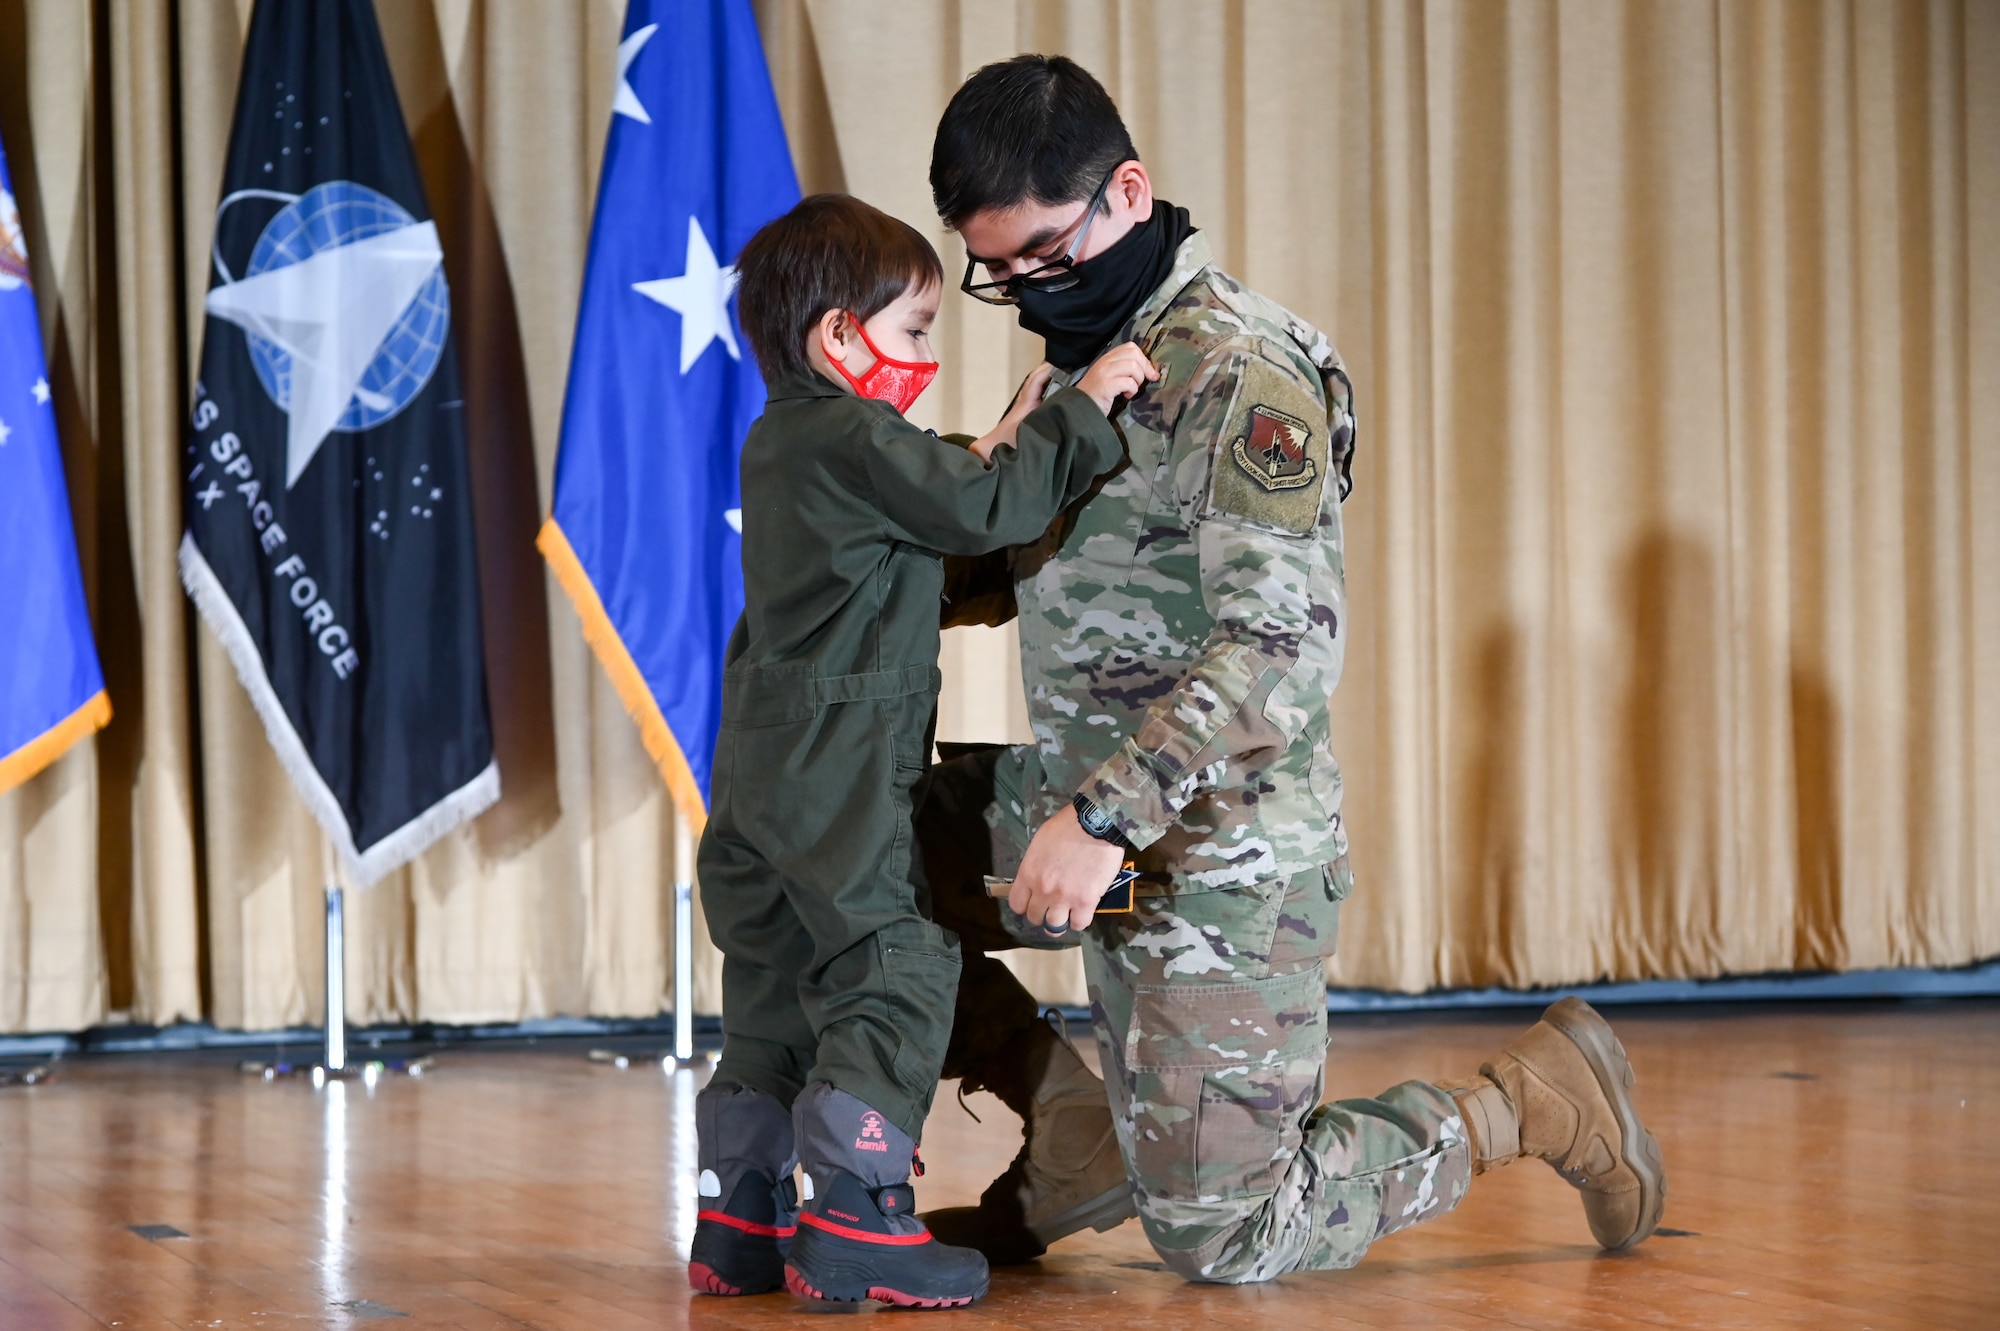 Captain Sergio Martinez, Air Force Life Cycle Management Center, gets his patches replaced by his son at the U.S. Air Force Space Induction Ceremony Feb. 5, 2020